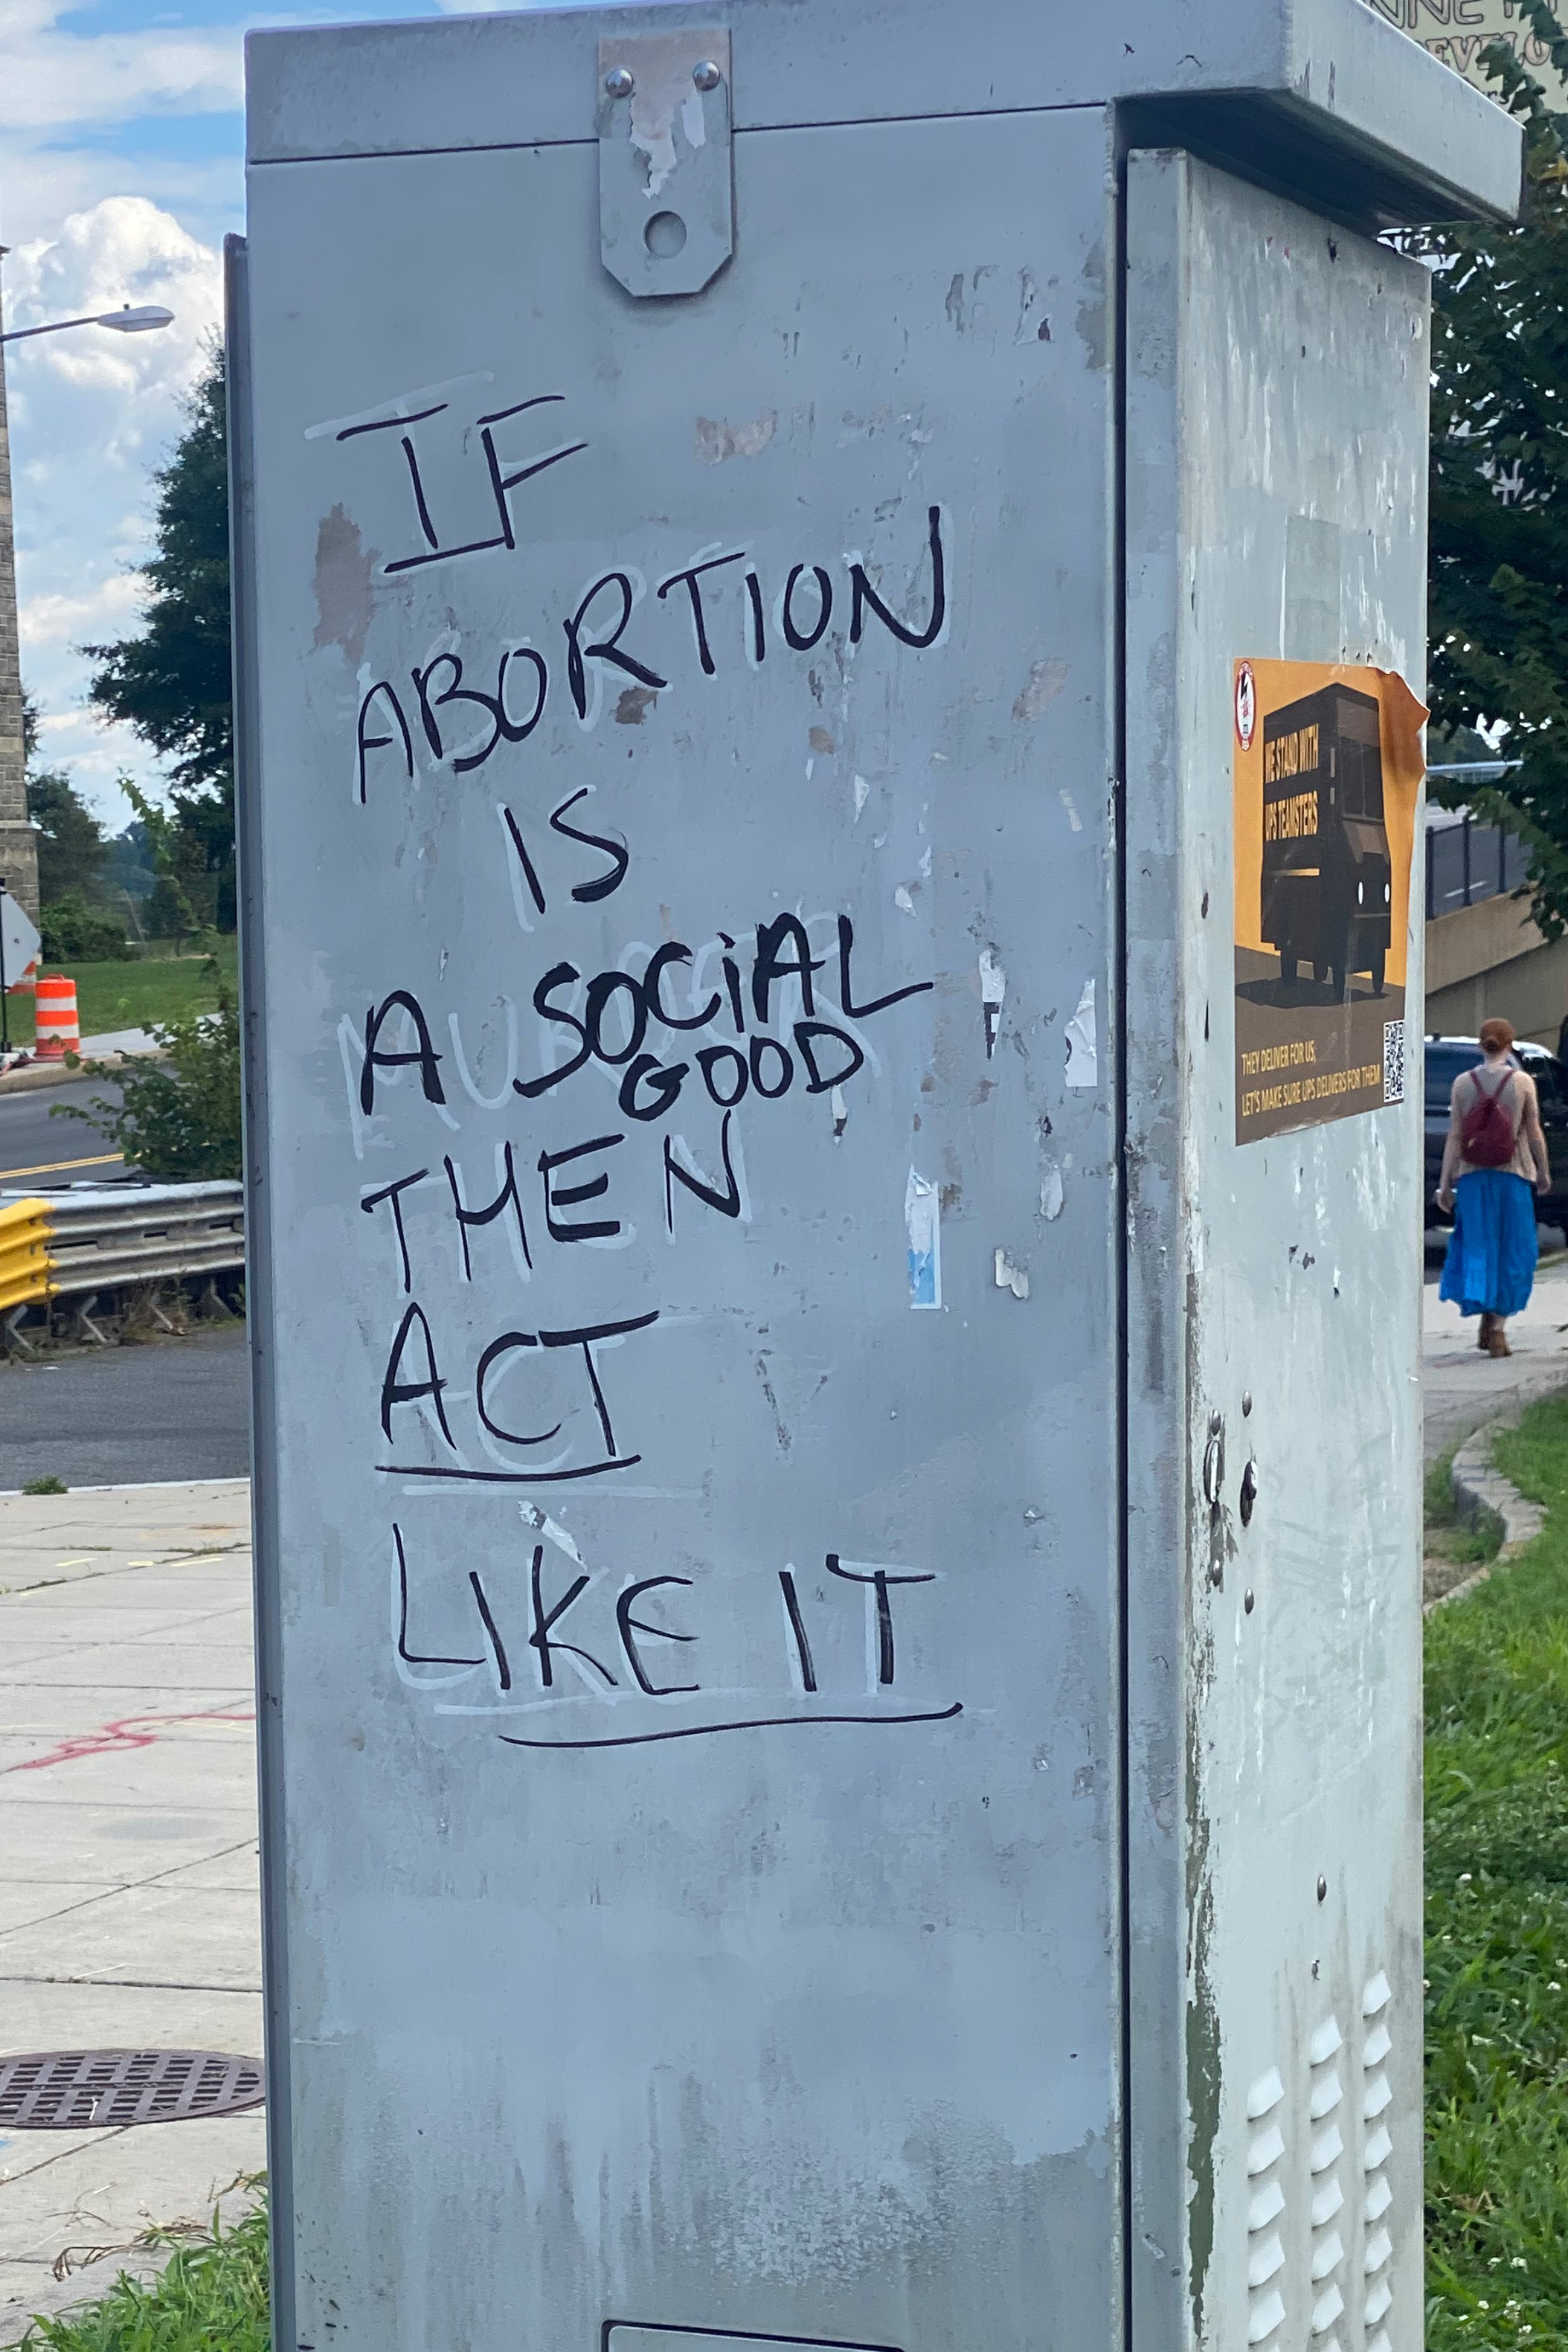 On the side of a metal pillar, graffiti is loosely written in black marker. It says, "if abortion is a social good, then act like it." The black marker has written over white marker, which faintly reads, "abortion is murder."